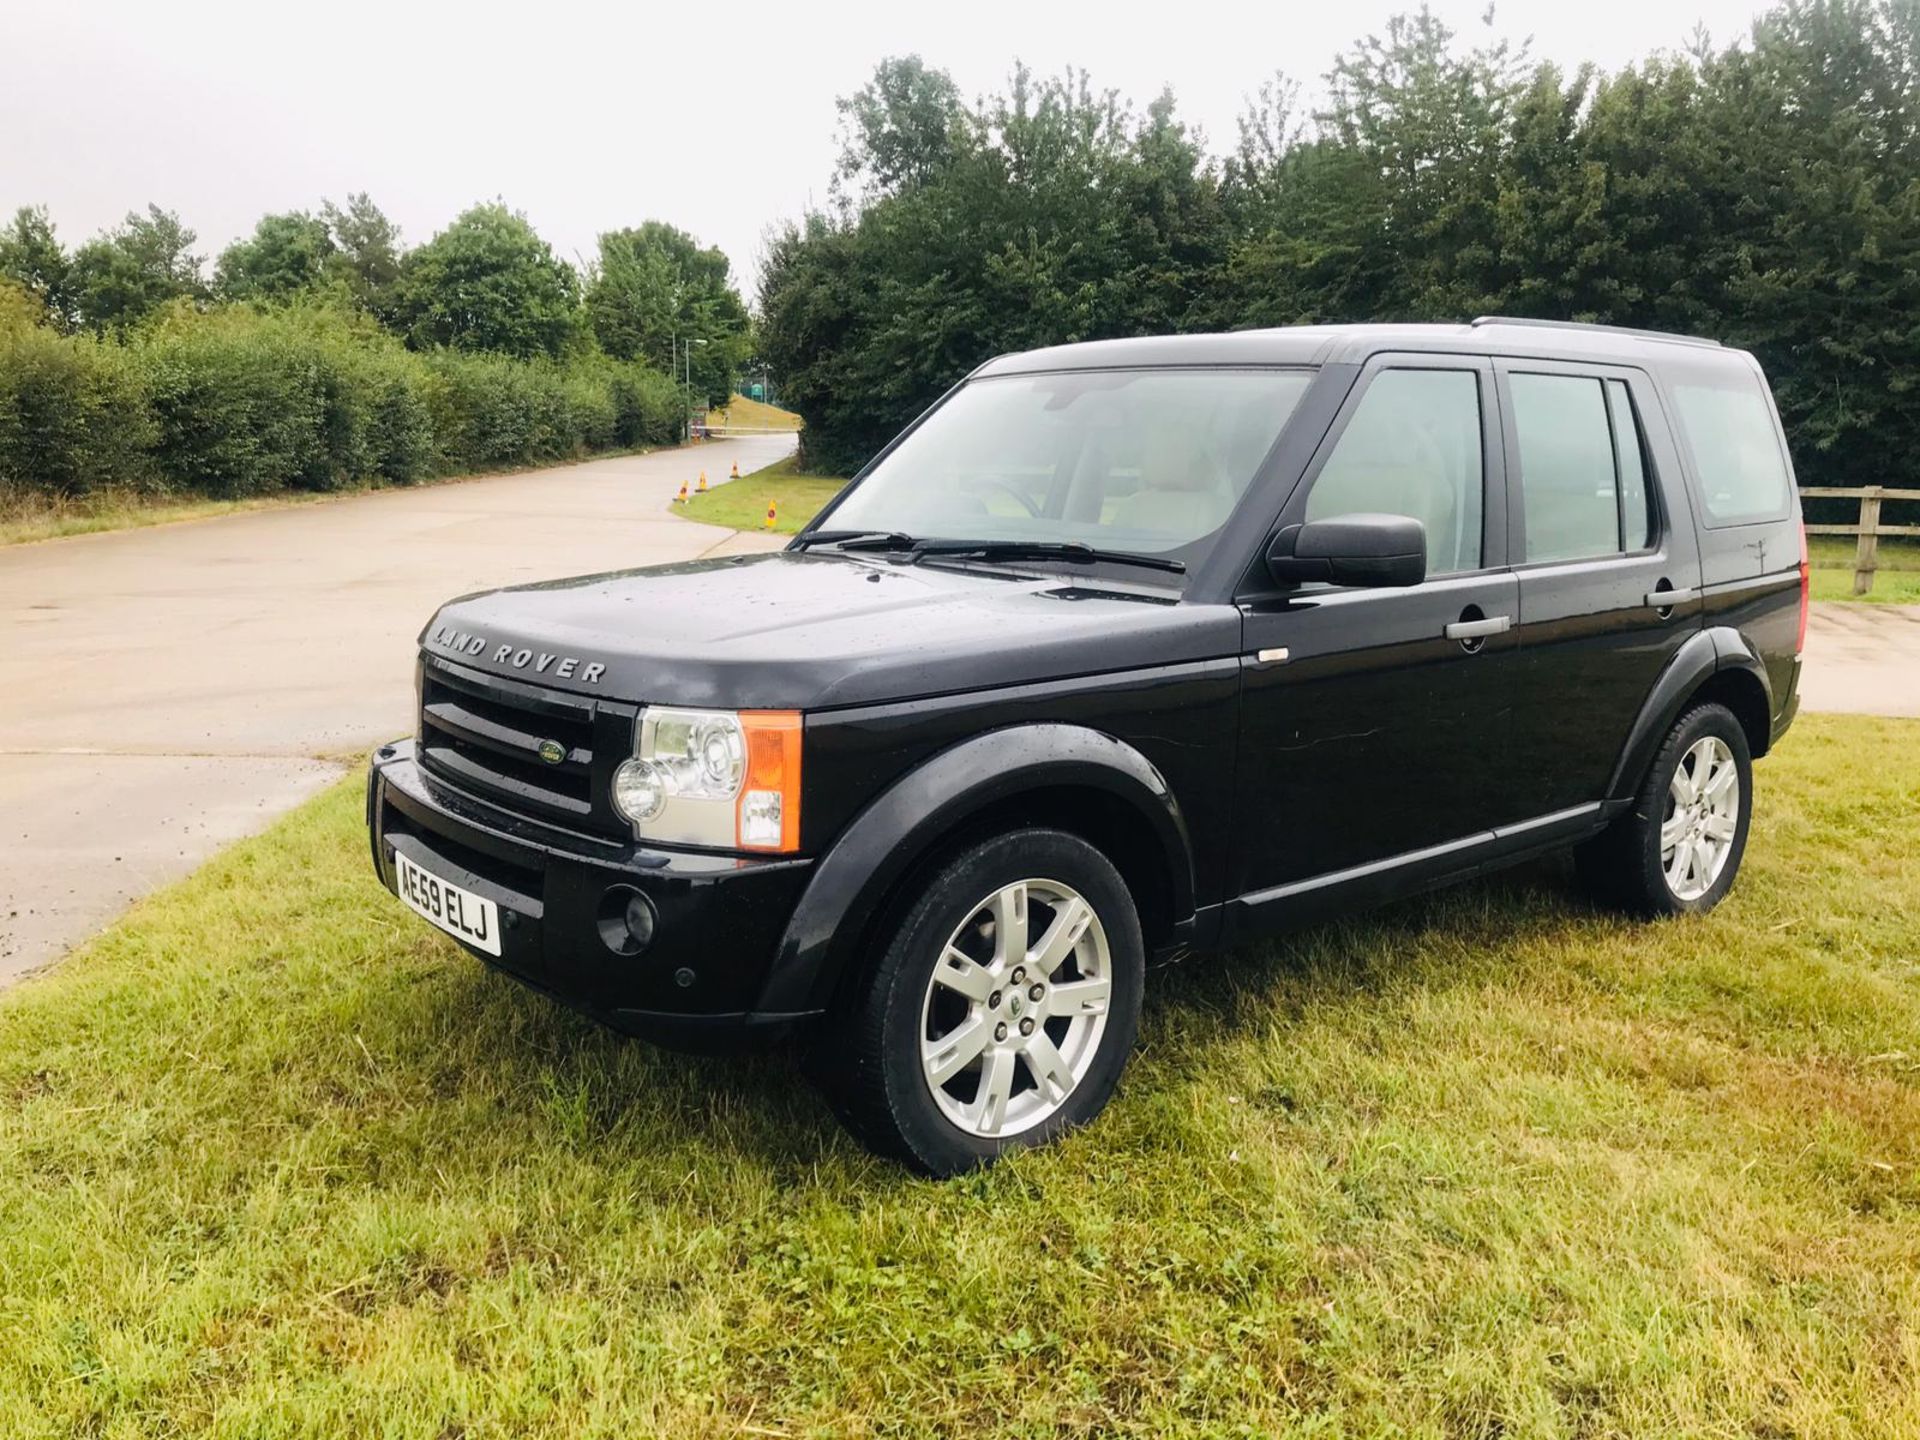 (RESERVE MET) Land Rover Discovery 2.7 TDV6 HSE Auto - 2010 Model - 1 Keeper From New - Sat Nav -